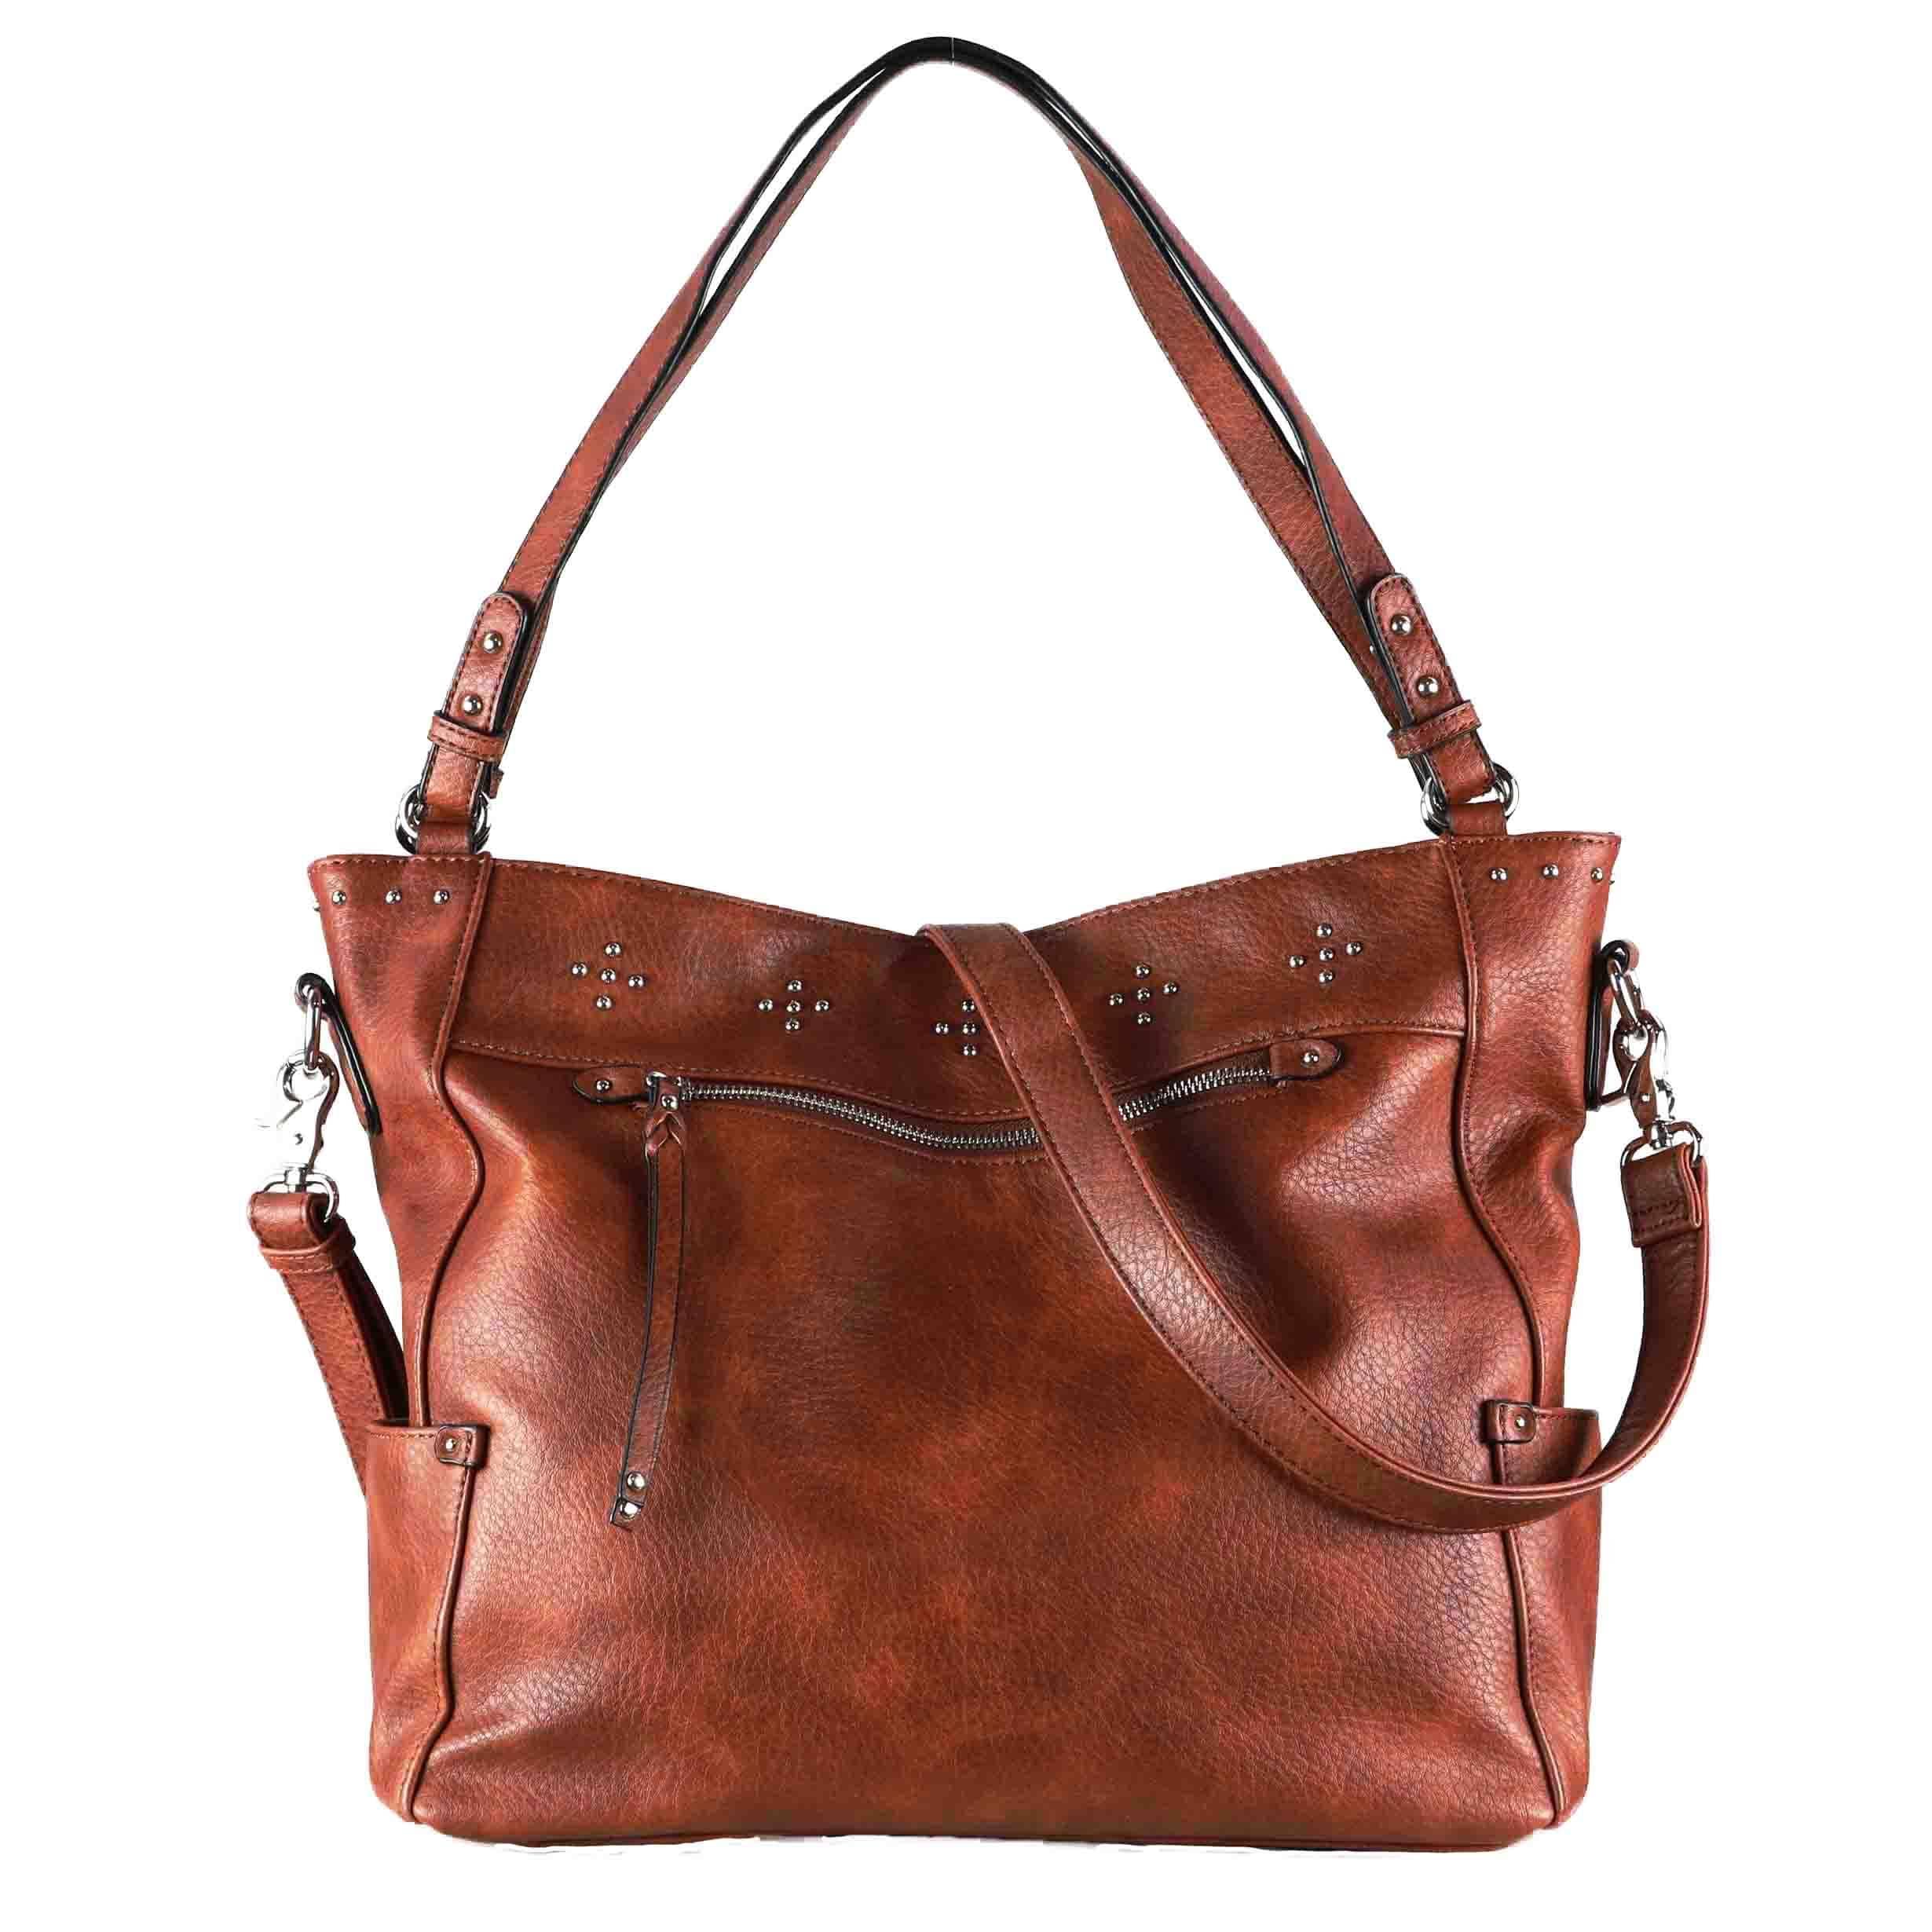 Concealed Carry Brooklyn Tote